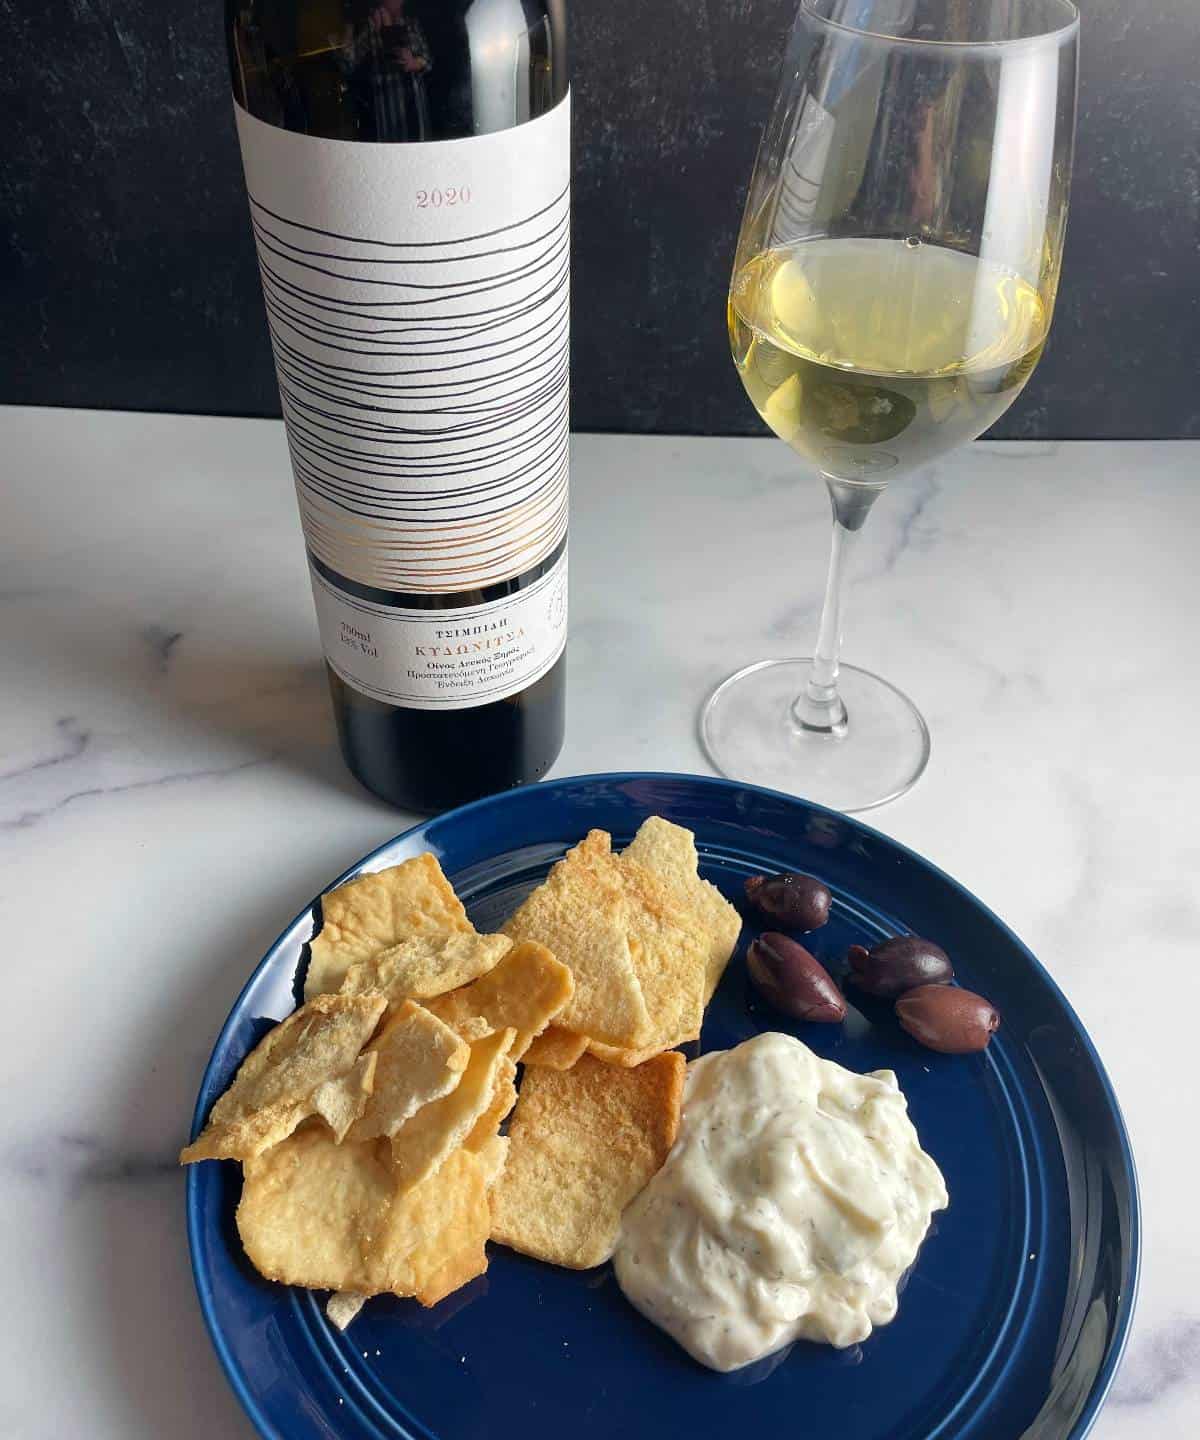 tzatziki dip on a blue plate with pita chips and kalamata olives, with a Greek white wine in the background.